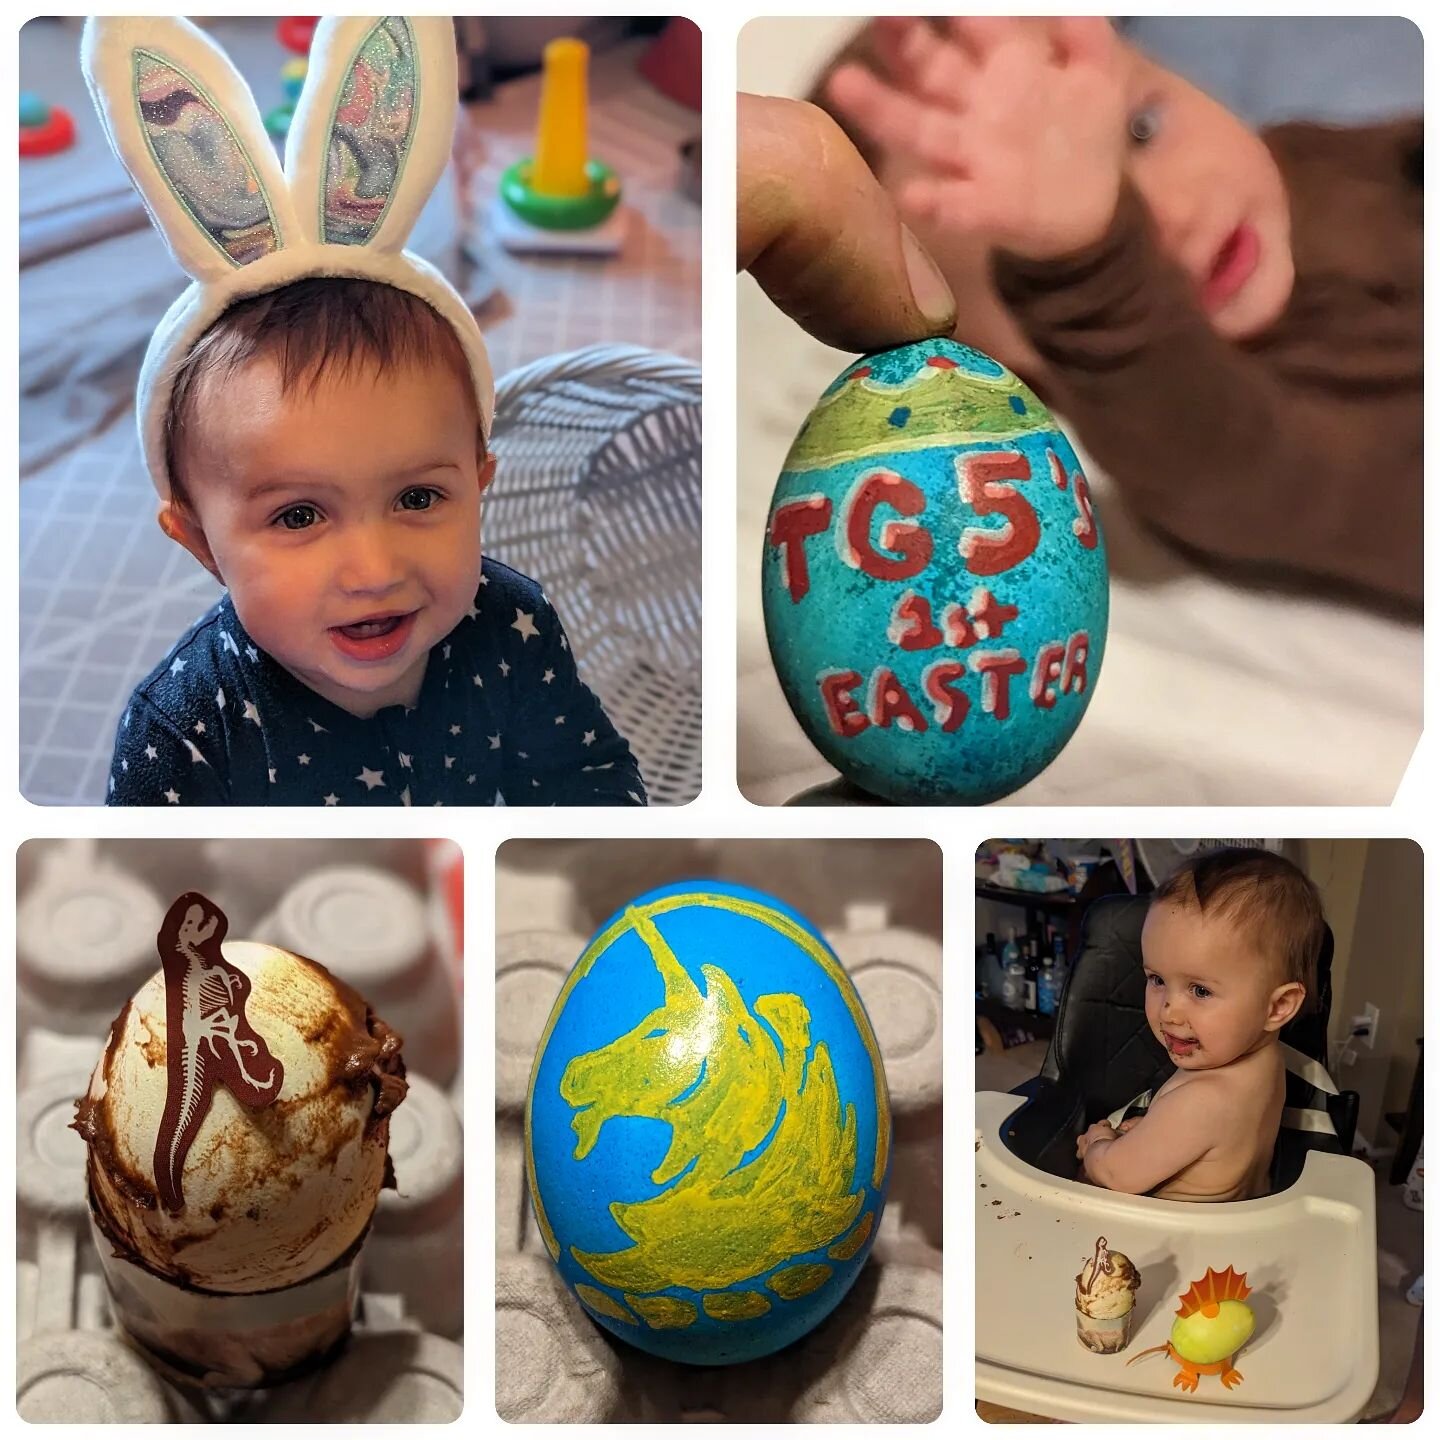 Happy almost #BostonMarathon day! Oh yeah and the other thing. First annual TG4 v TG5 #EasterEgg competition.. I won't tell you whose is whose because I don't want to sway any opinions.
..
..
#HappyEaster #EasterEggDecorating #BostonMarathon2023 #Mar